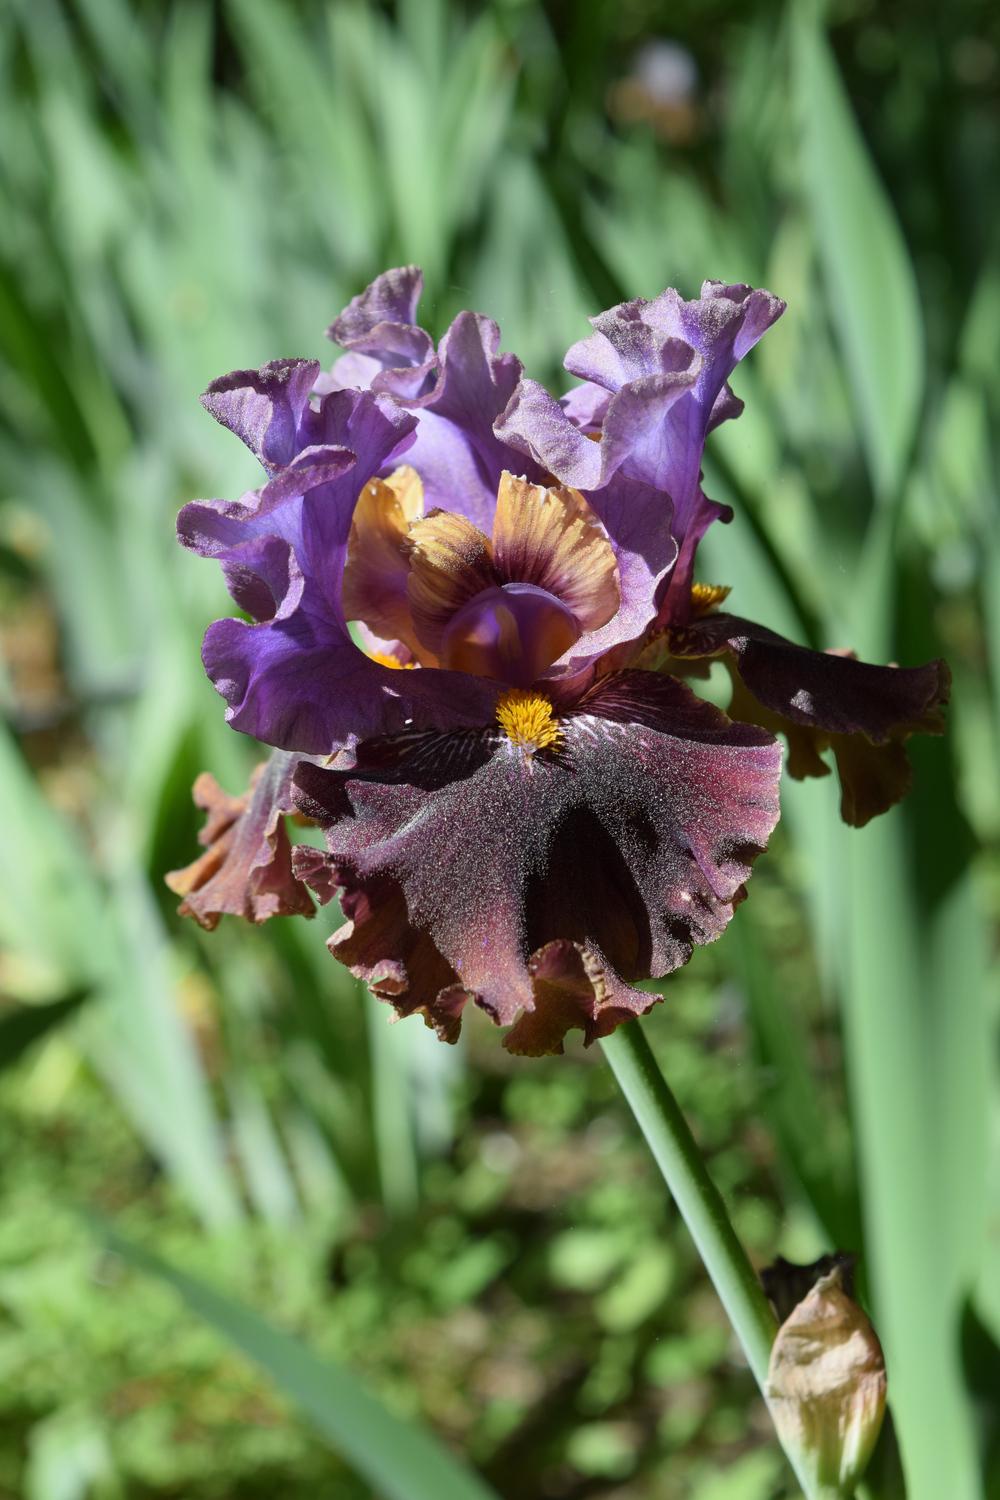 Photo of Tall Bearded Iris (Iris 'Rum is the Reason') uploaded by Dachsylady86